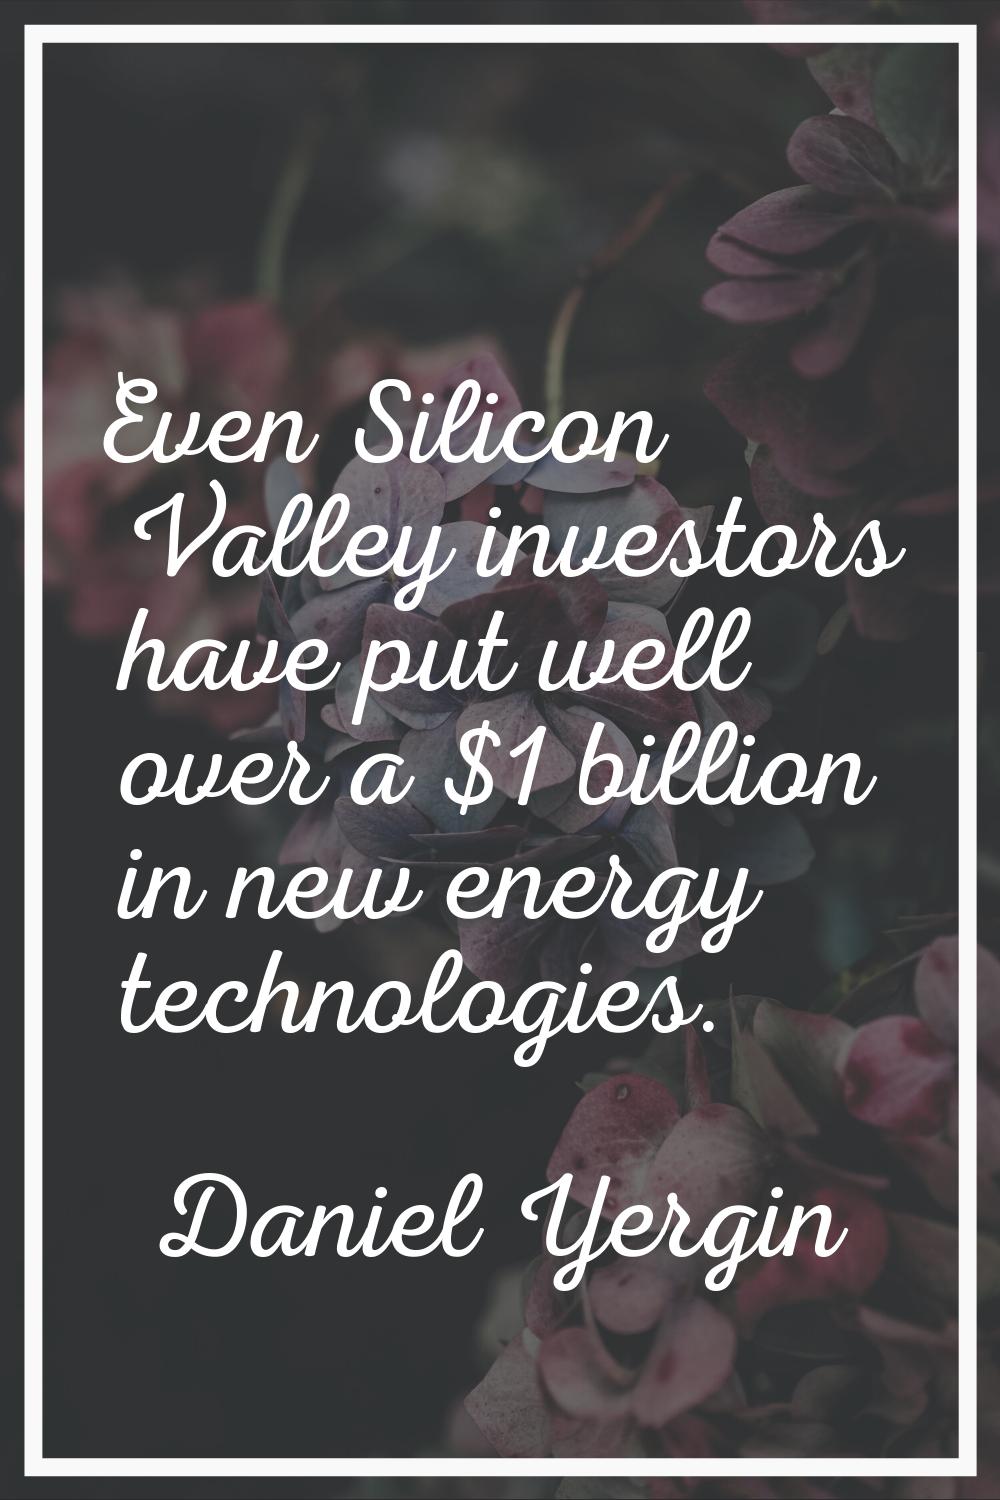 Even Silicon Valley investors have put well over a $1 billion in new energy technologies.